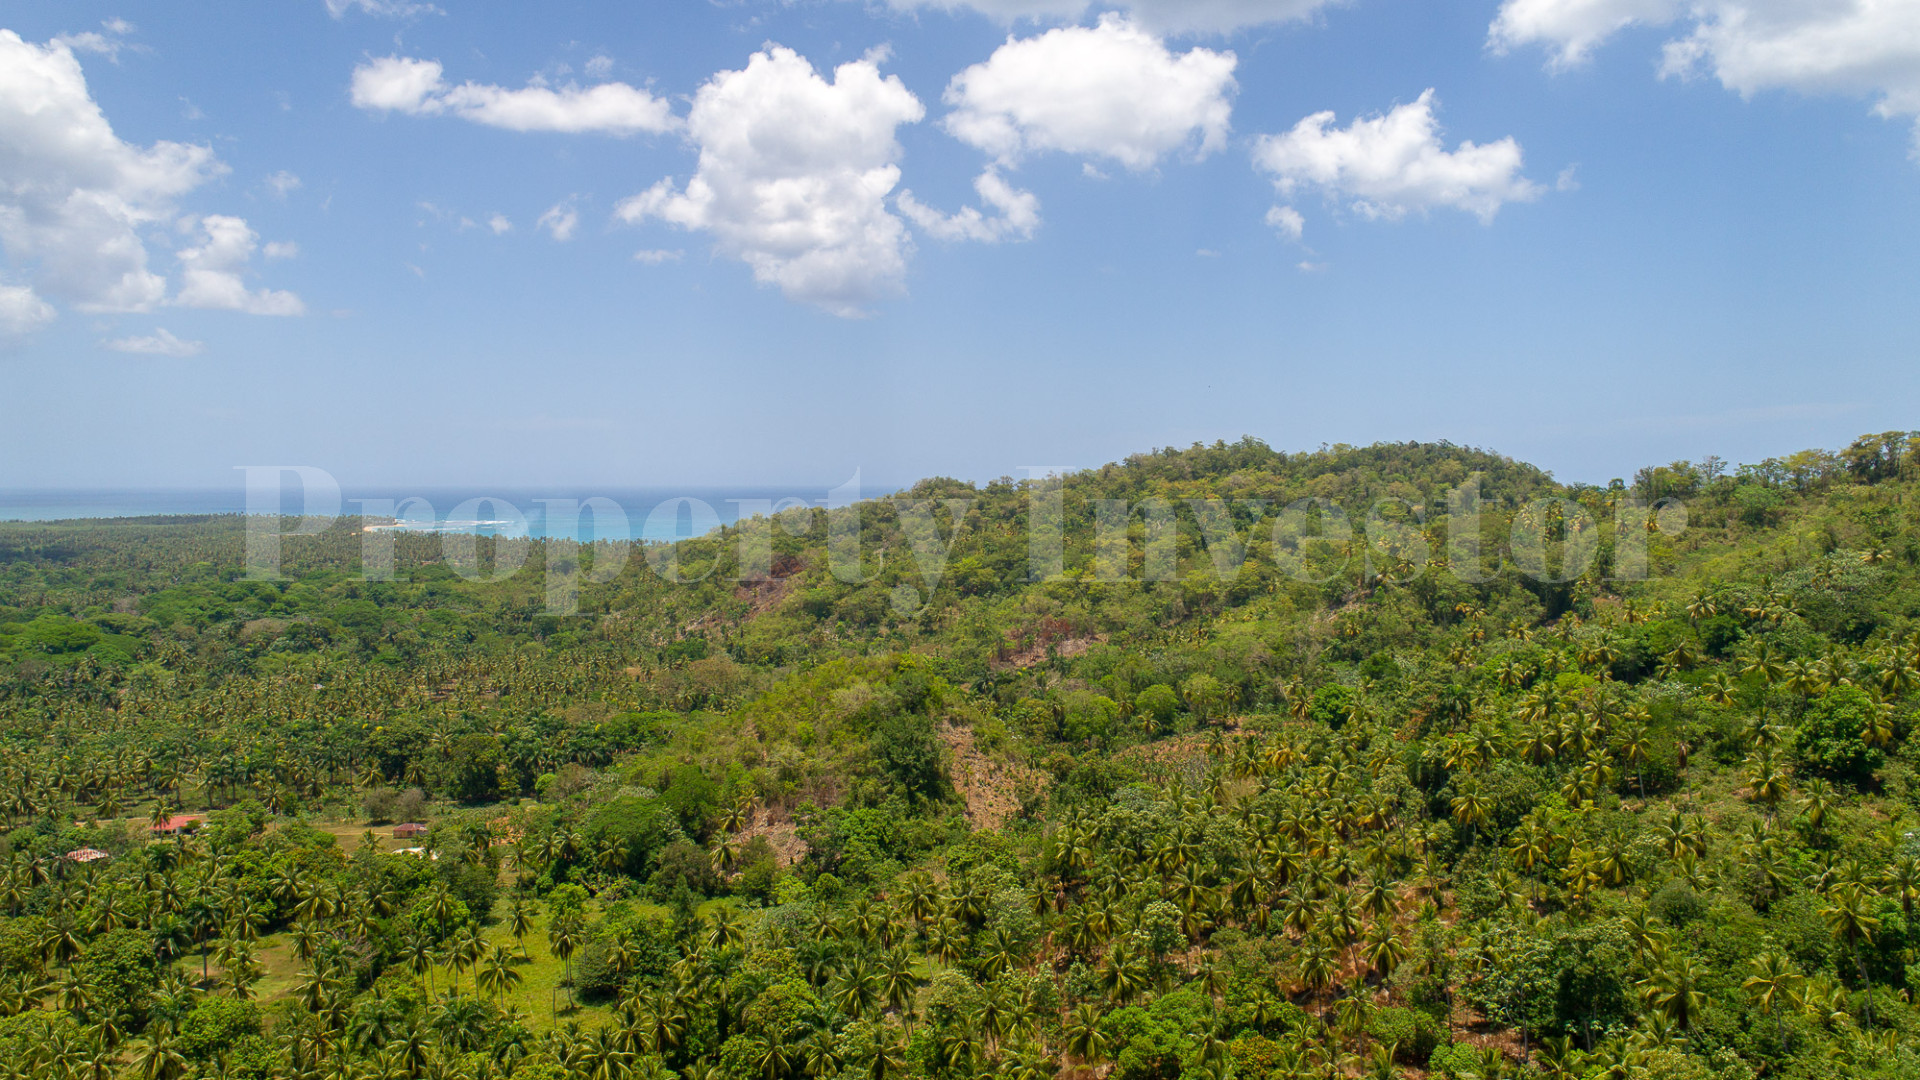 Approximately 200 Hectares of Land for Commercial or Tourism Development for Sale Near Las Terrenas, the Dominican Republic